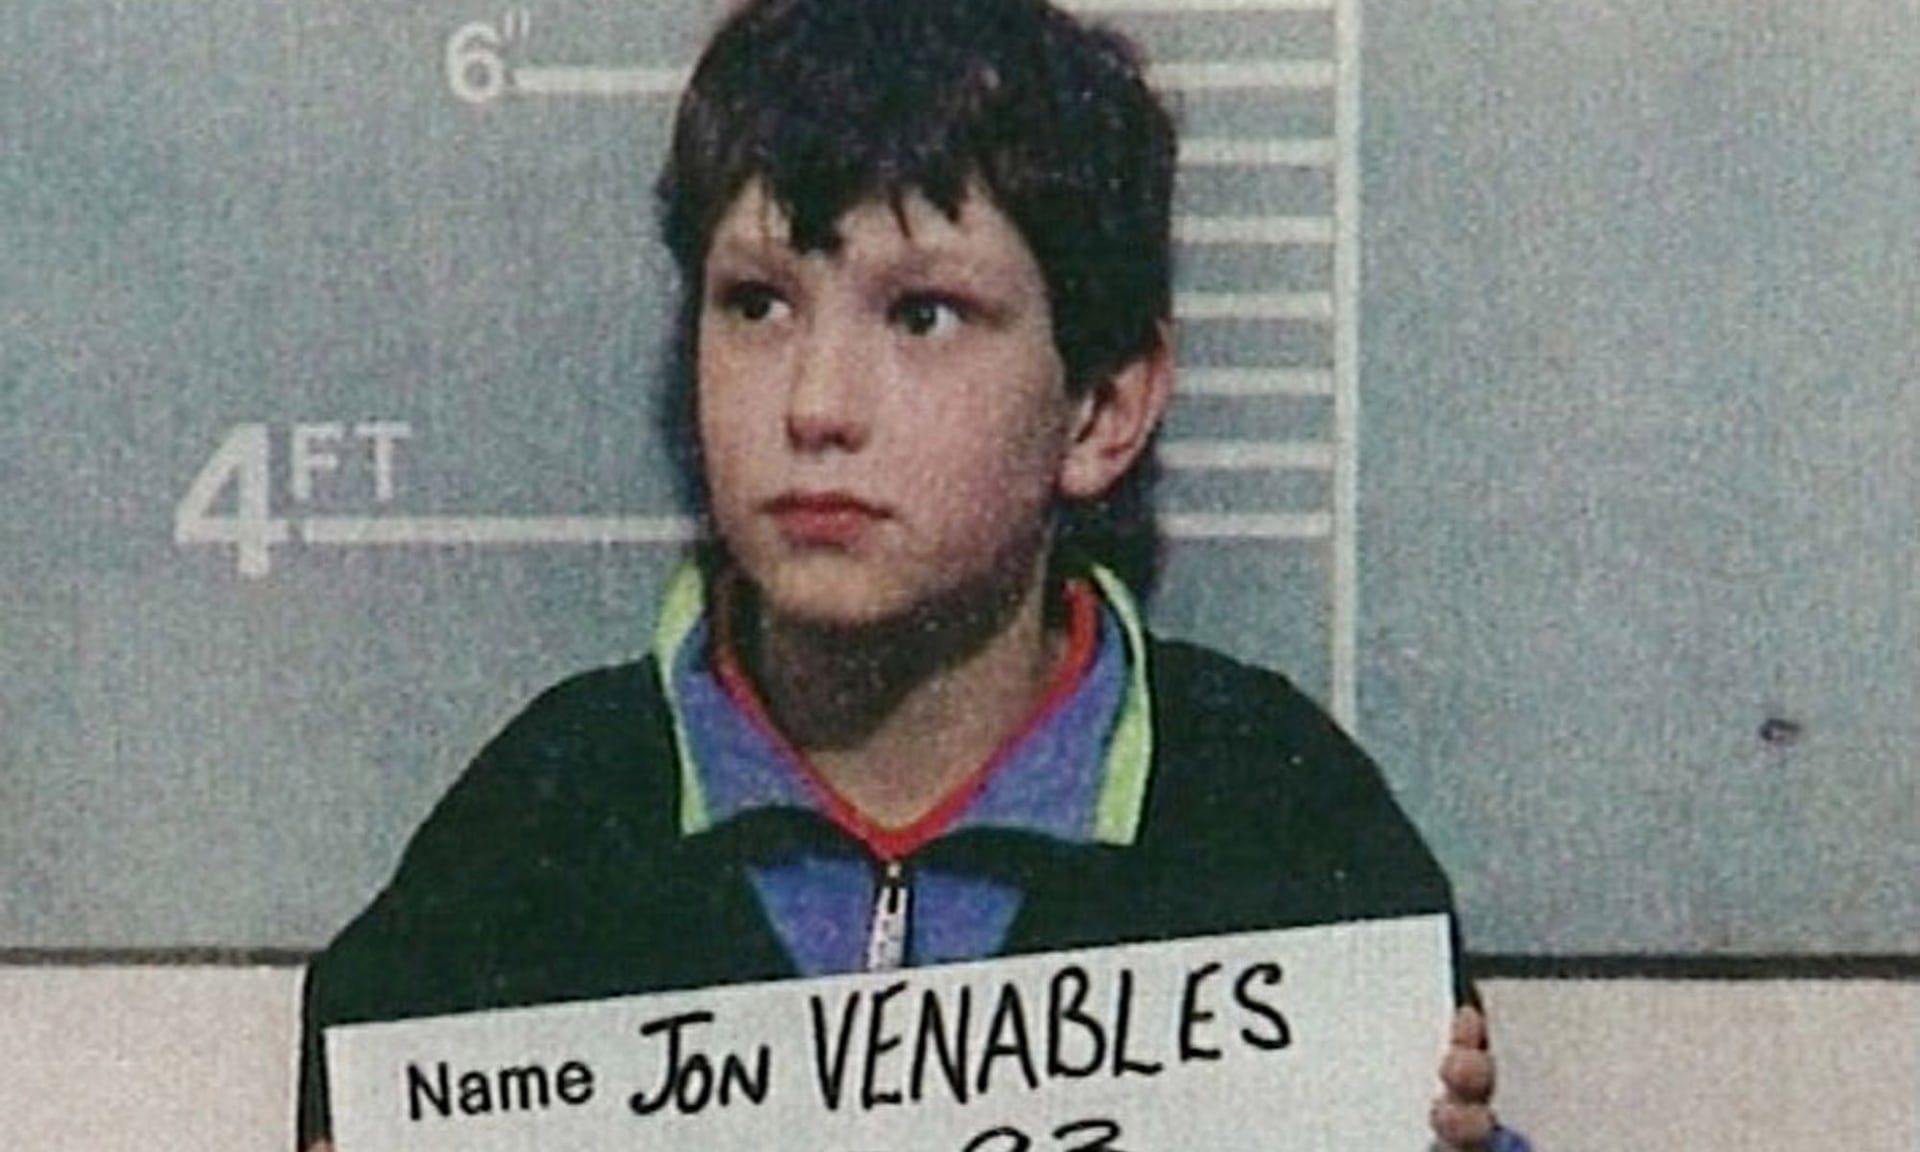 Jon Venables was 10 when he was jailed in 1993 alongside his friend Robert Thompson for the murder of two-year-old James Bulger. Photograph: Getty Images